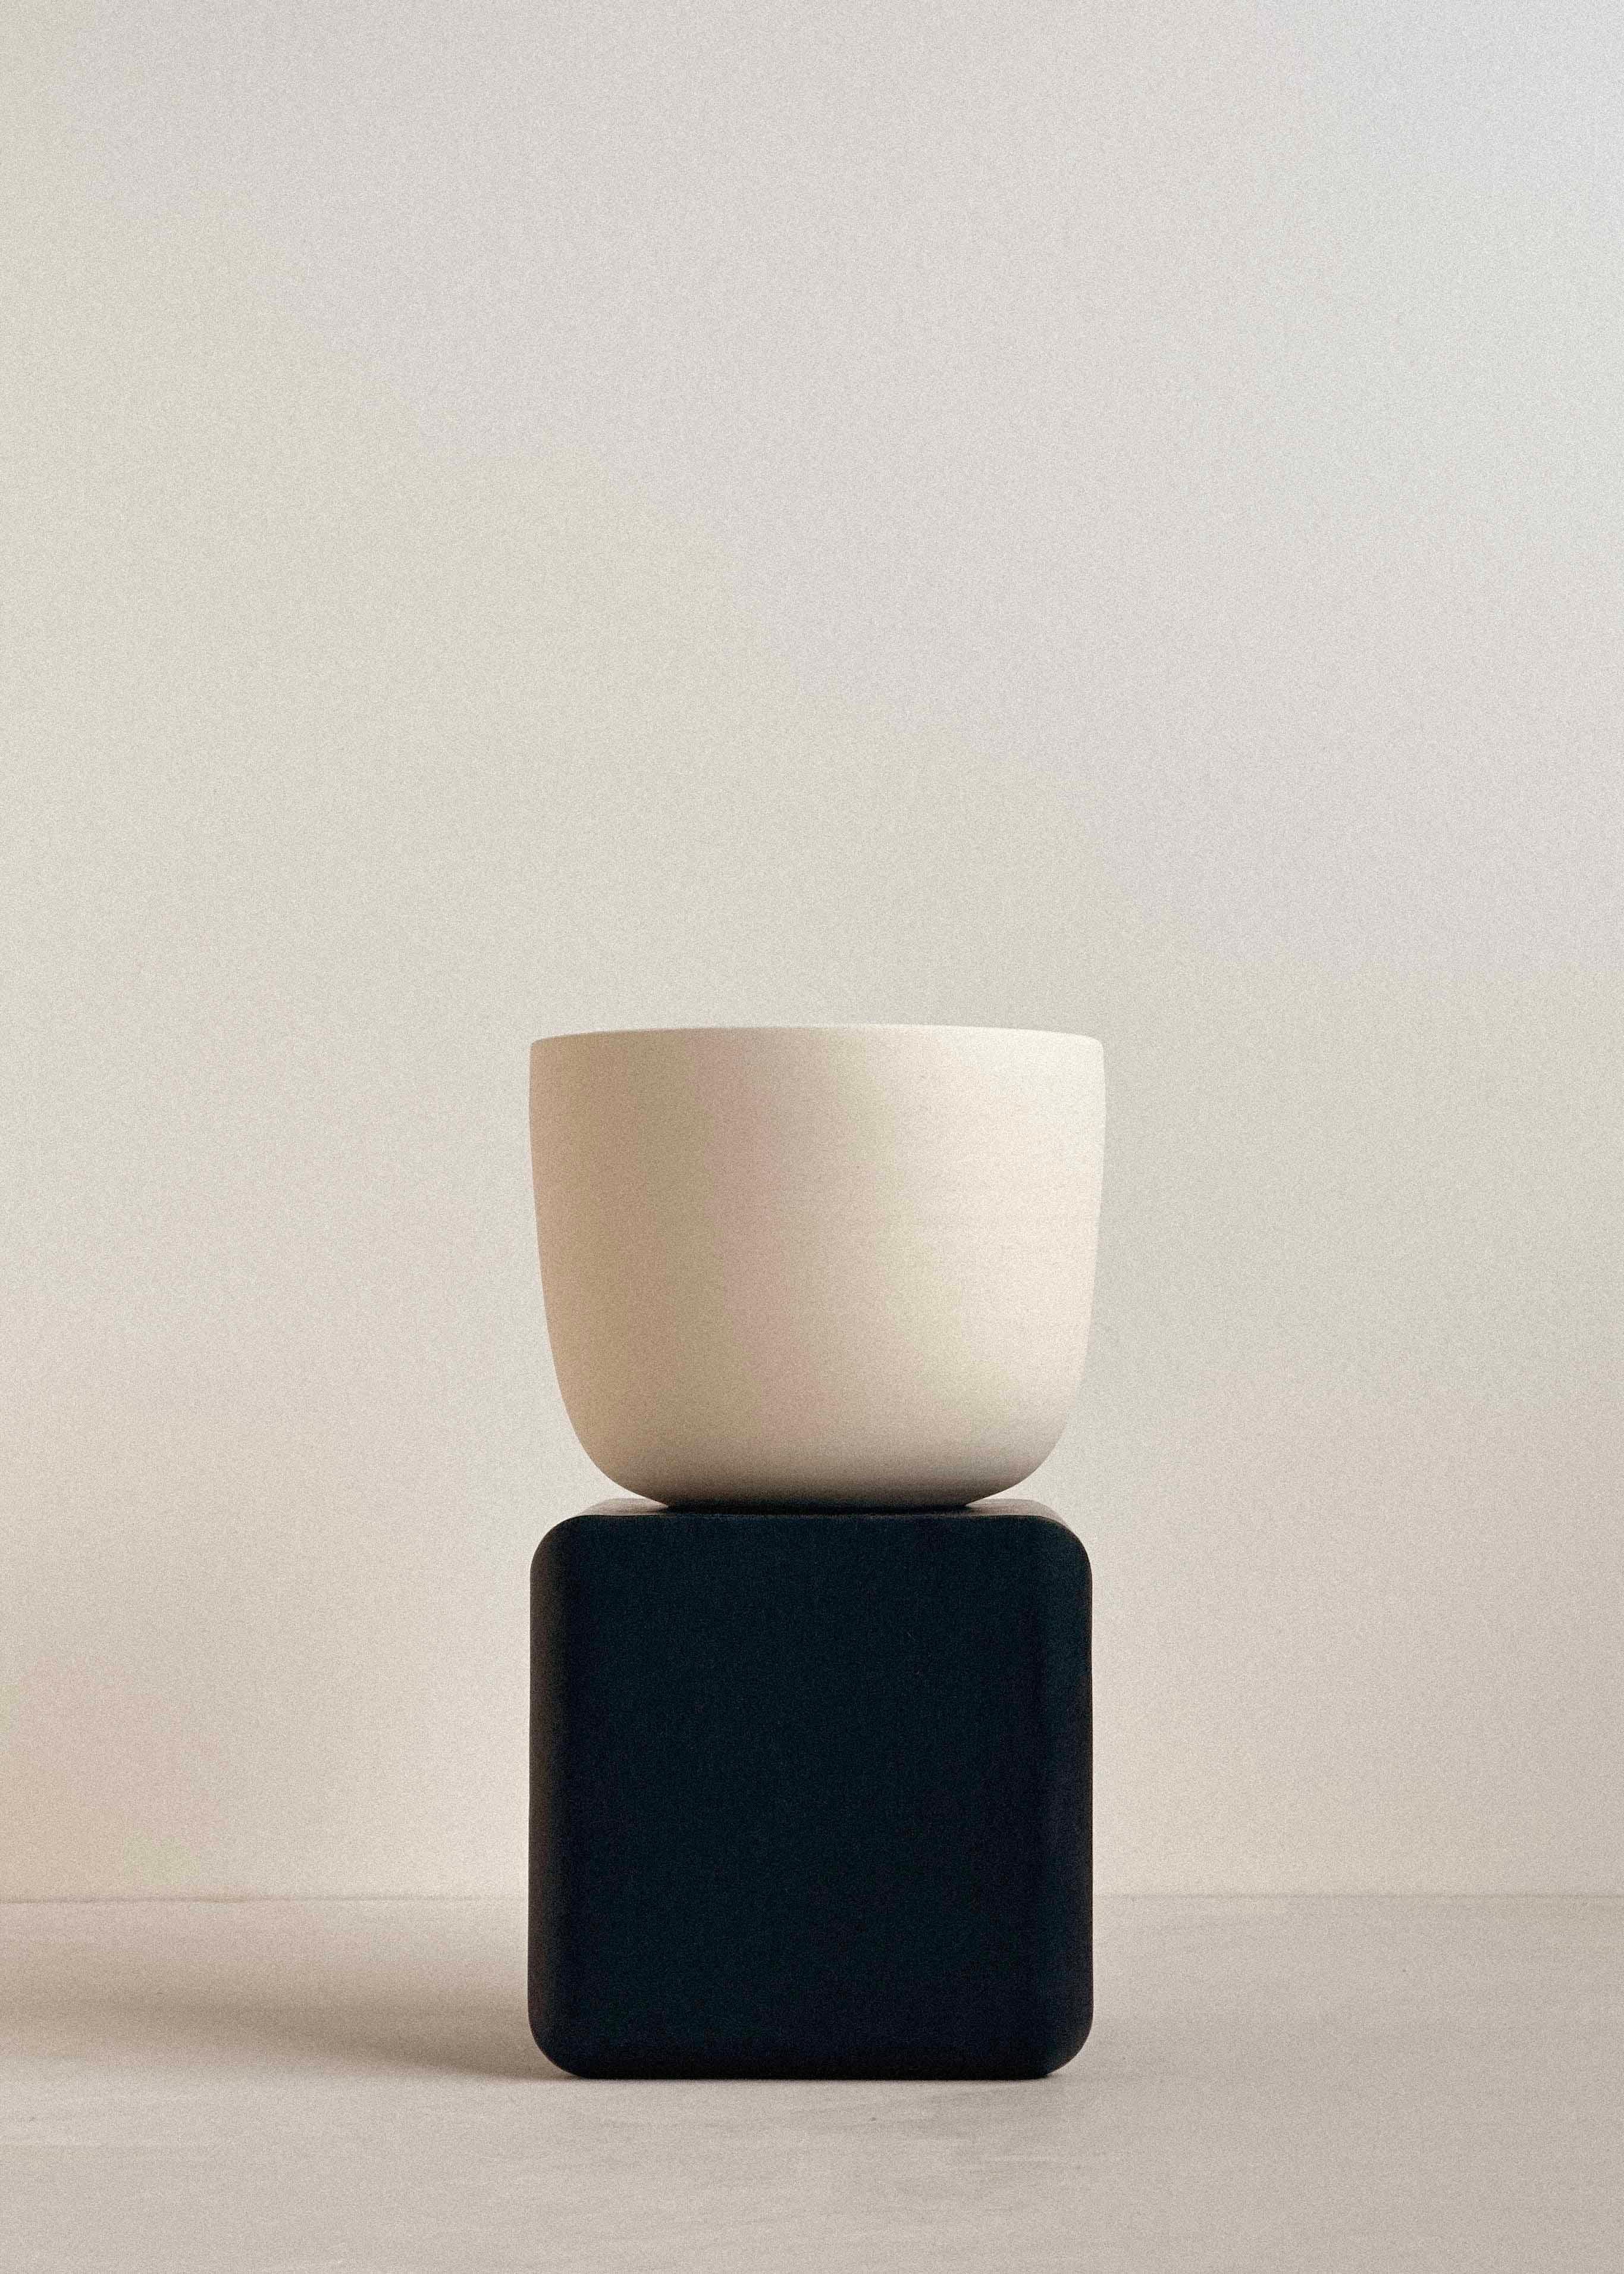 Minimalist Dunes Collection Supported Ceramic Vessel with Charred Black Maple Base, Small For Sale